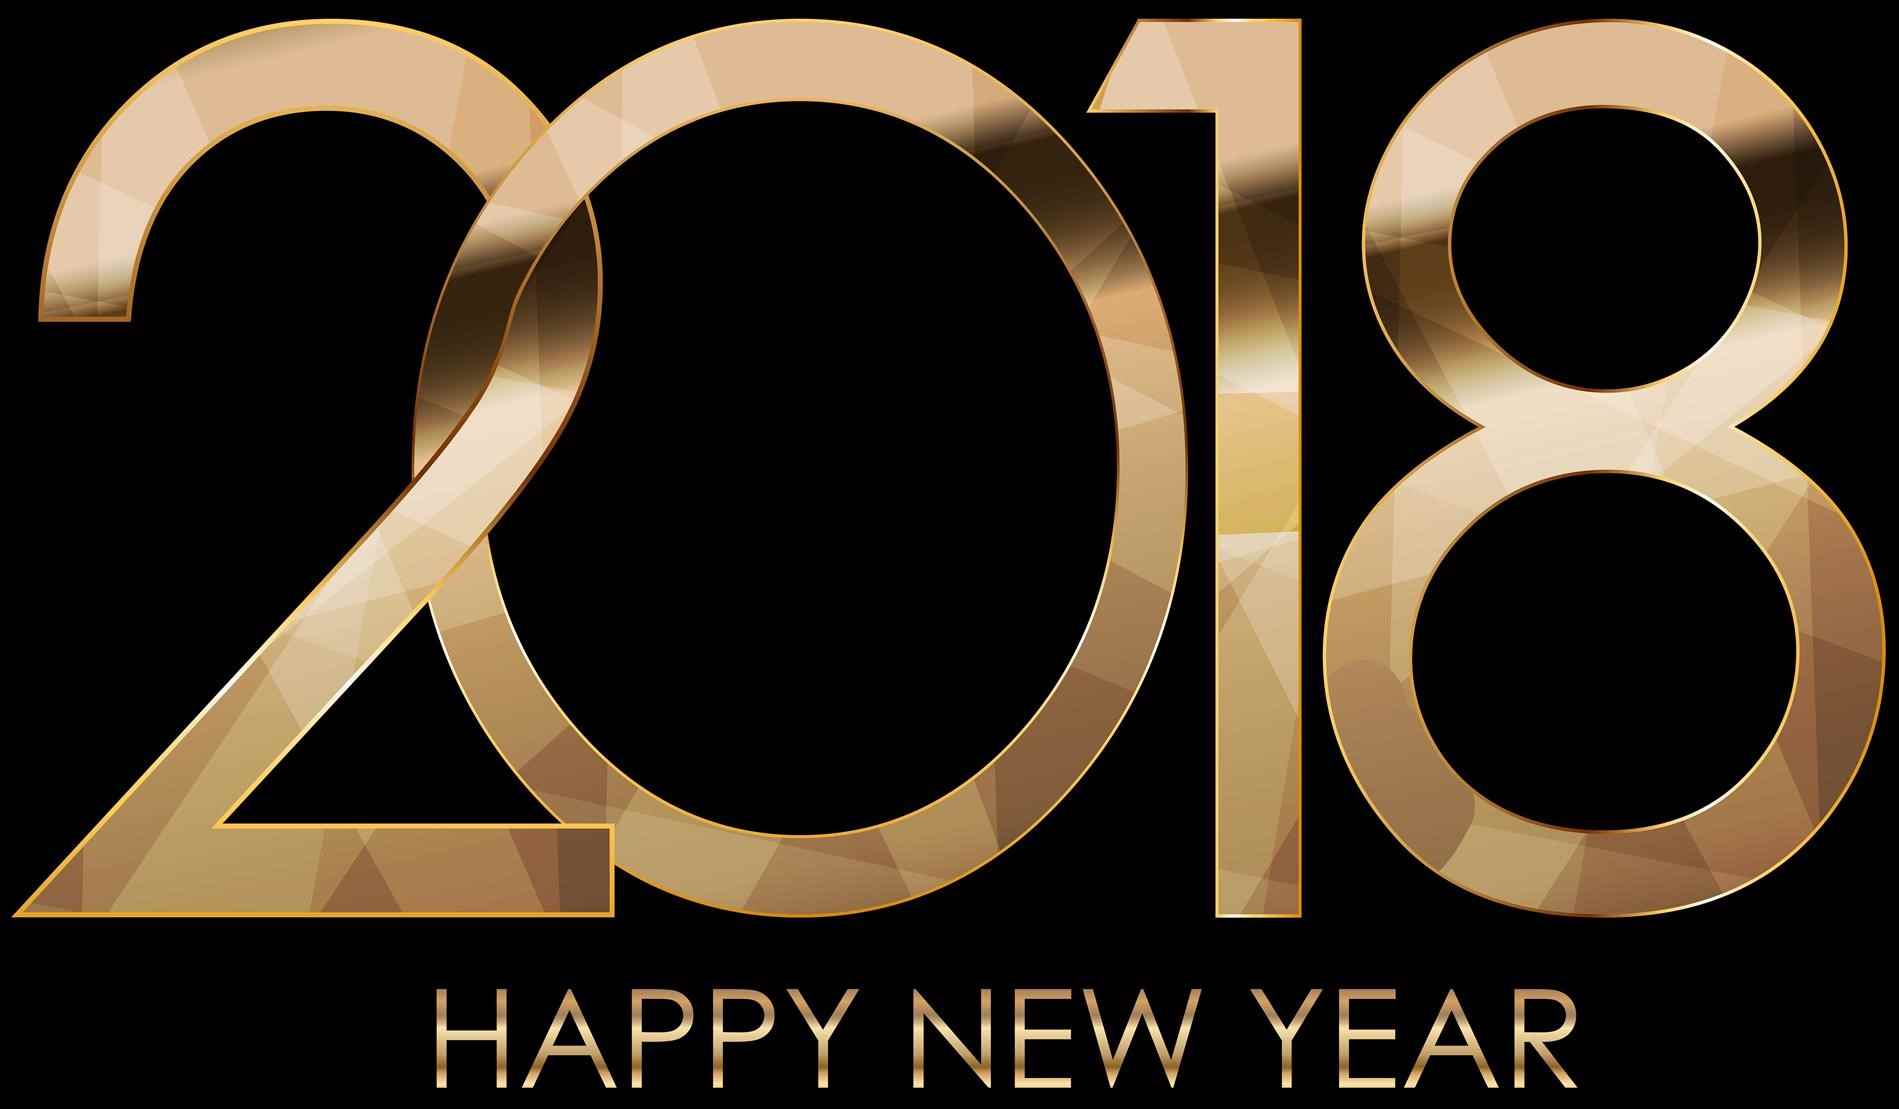 Happy New Year 2018 PNG Transparent Happy New Year 2018.PNG Images.